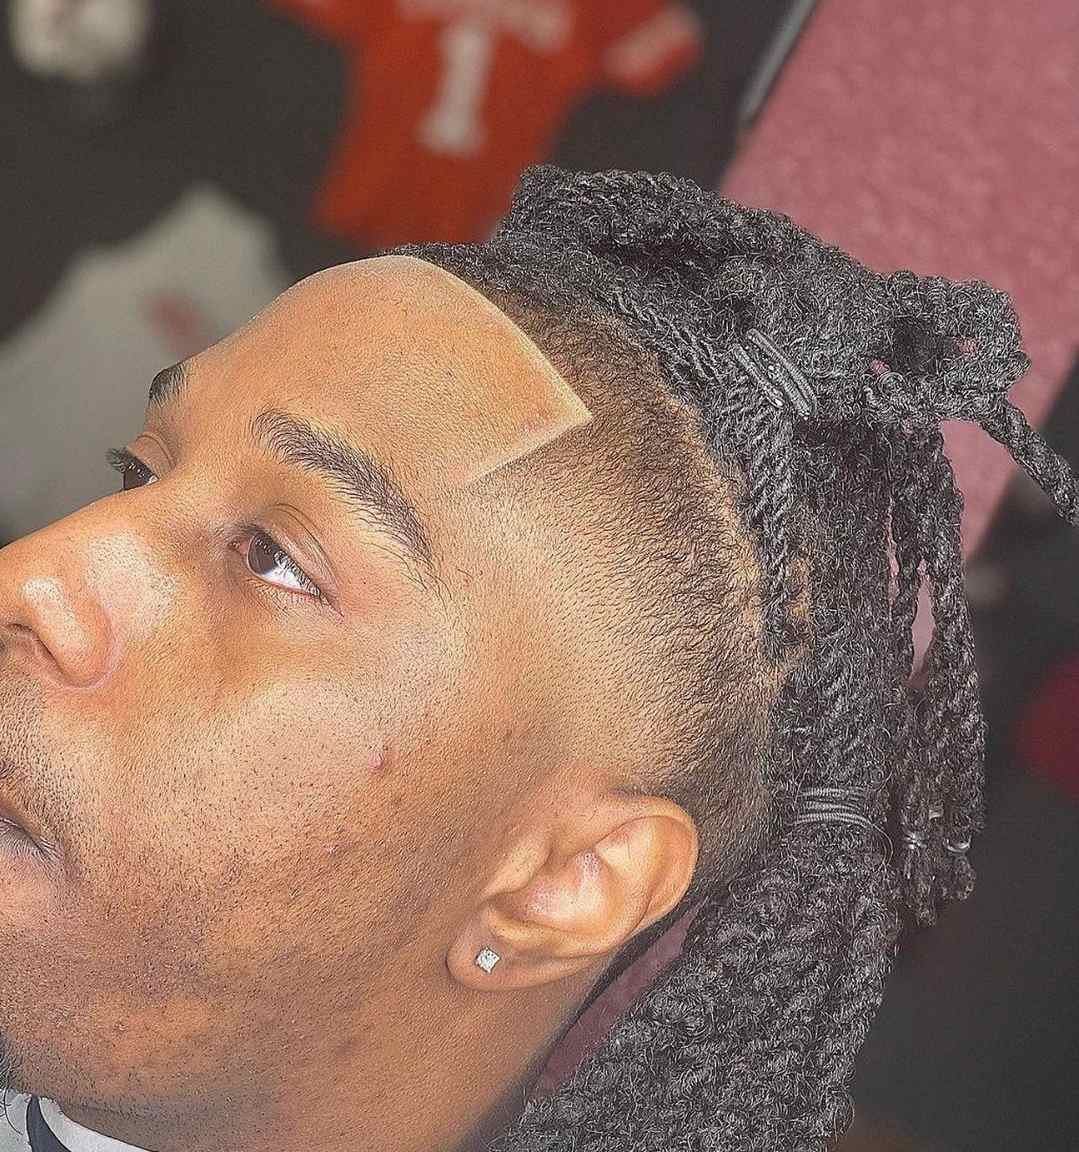 dope haircuts for black men